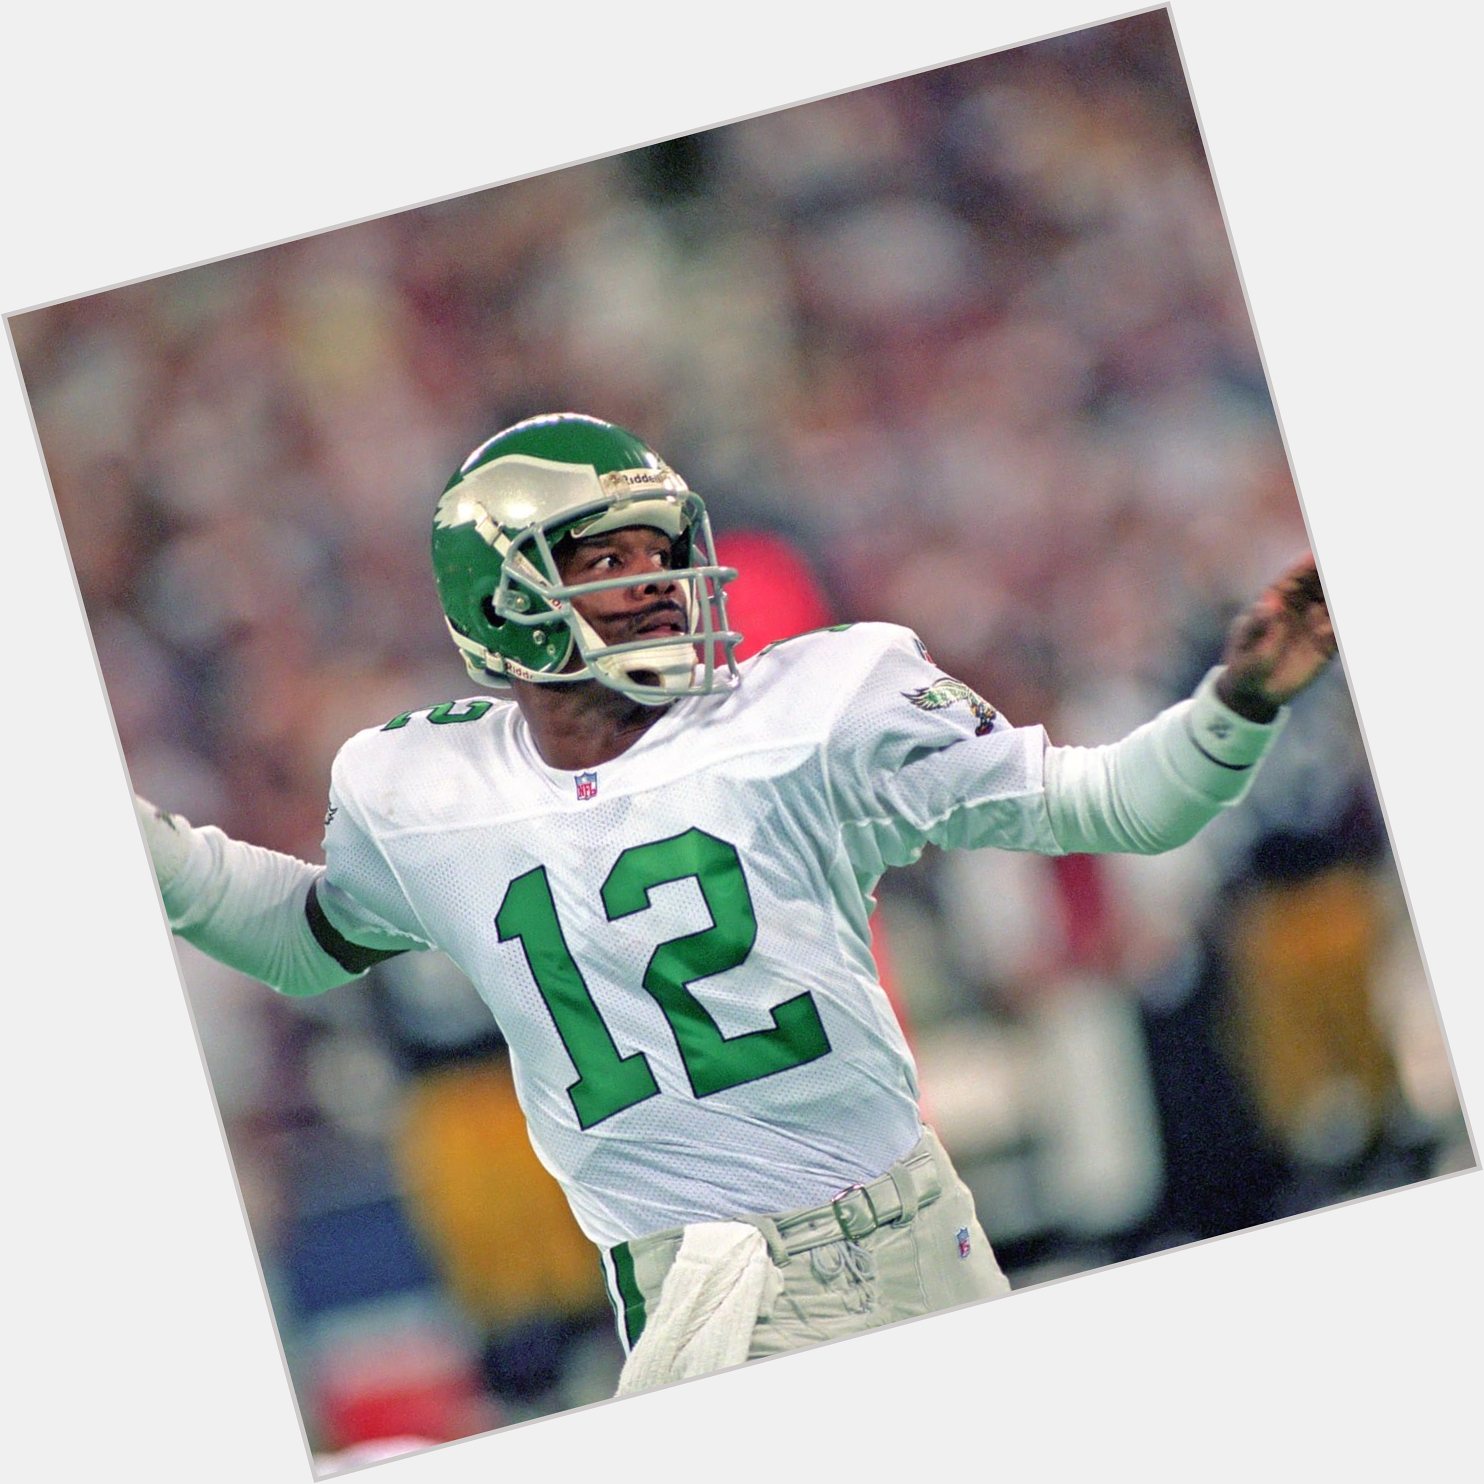 Happy 60th birthday to Randall Cunningham! Always the Ultimate Weapon 